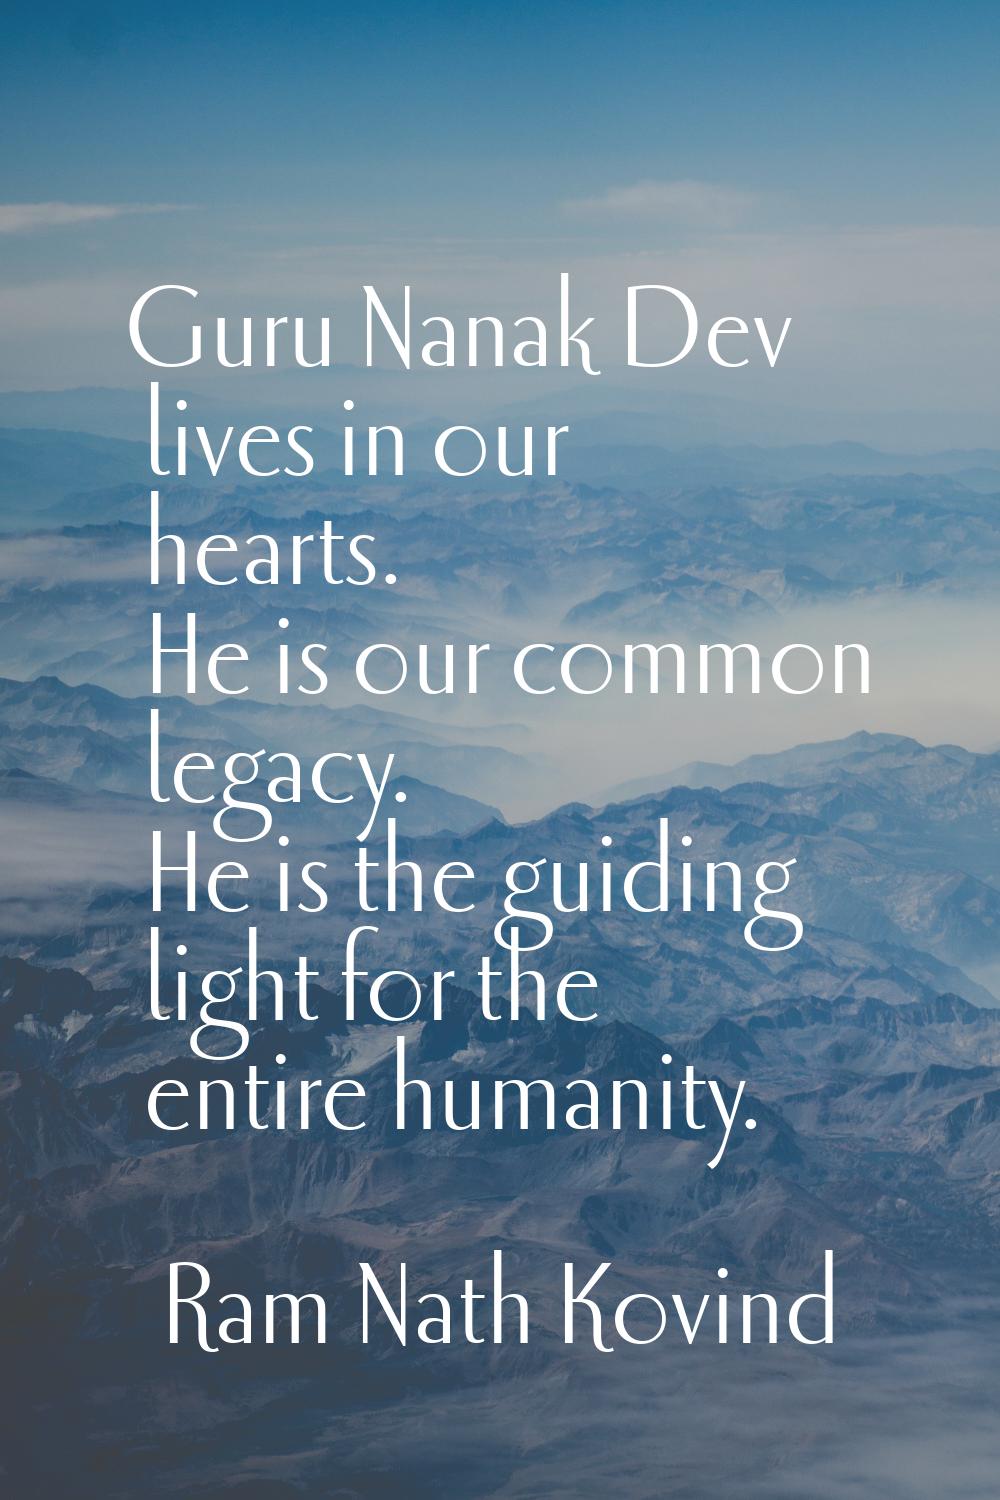 Guru Nanak Dev lives in our hearts. He is our common legacy. He is the guiding light for the entire